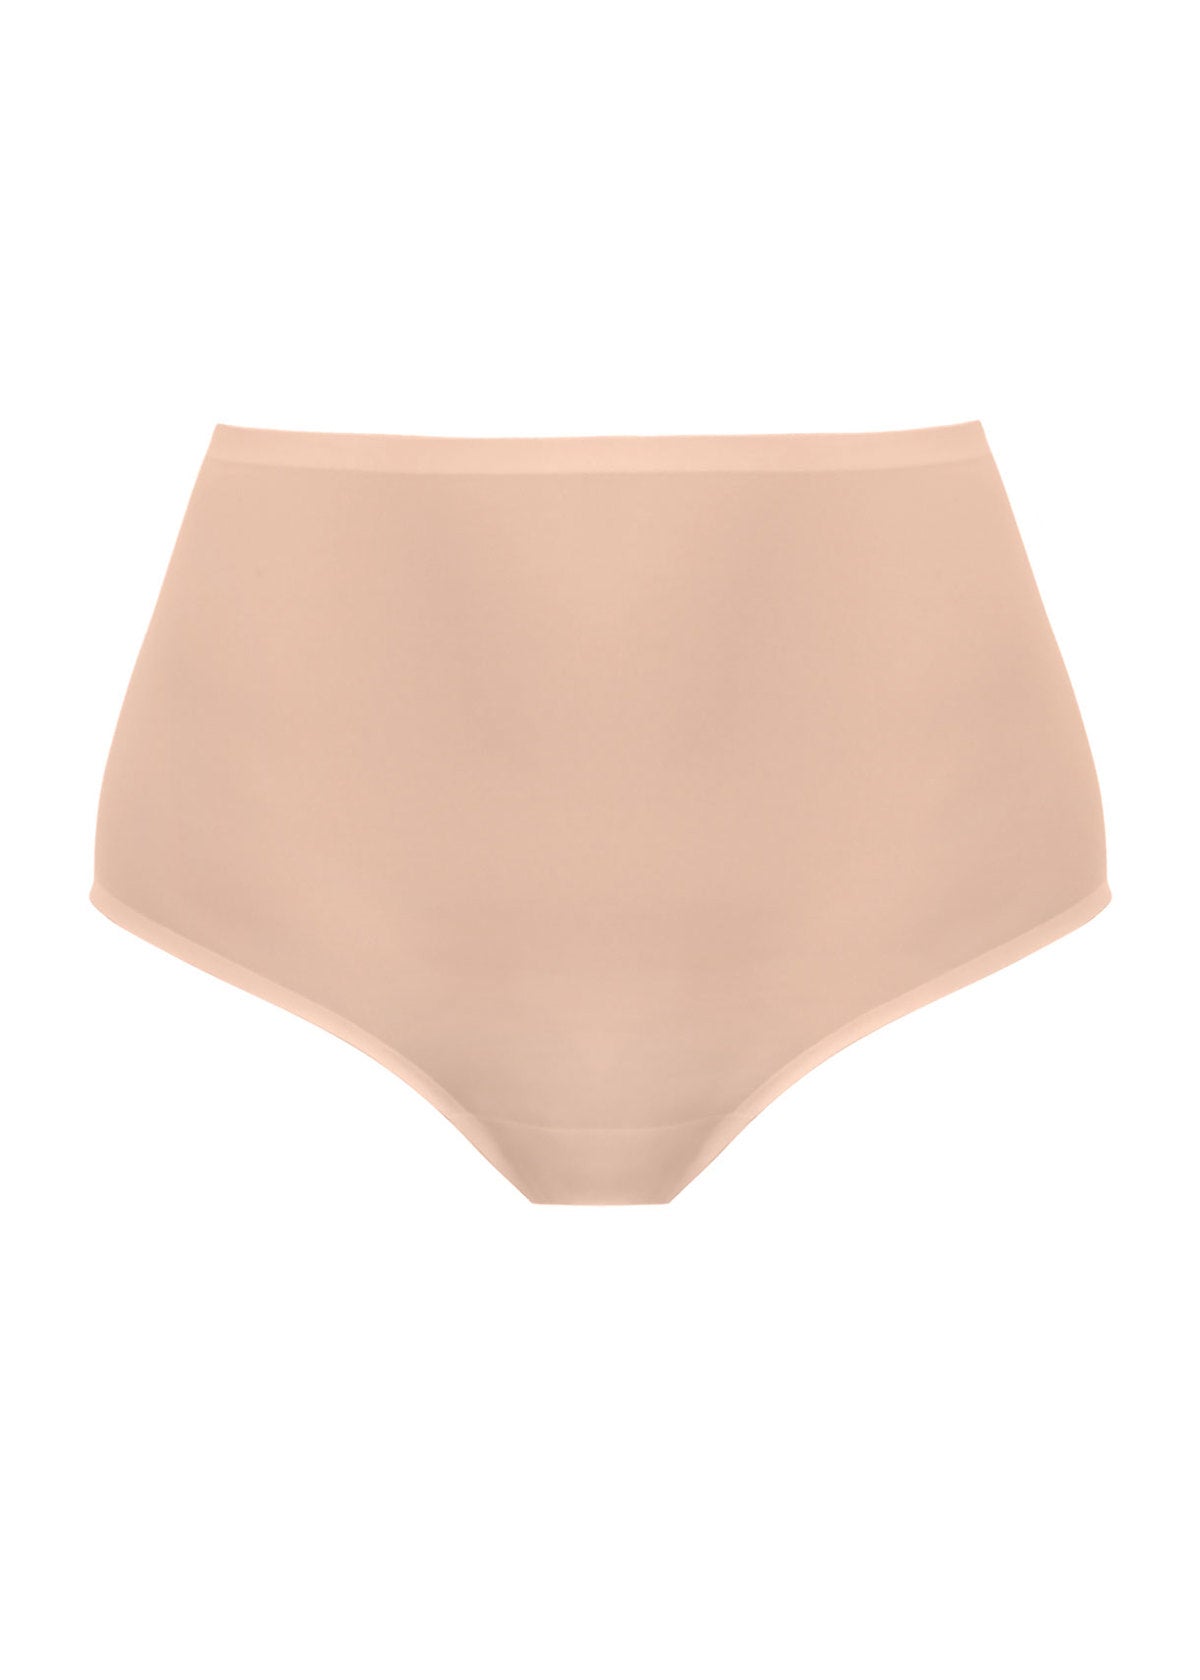 Smoothease Full Brief One Size Natural Beige front view